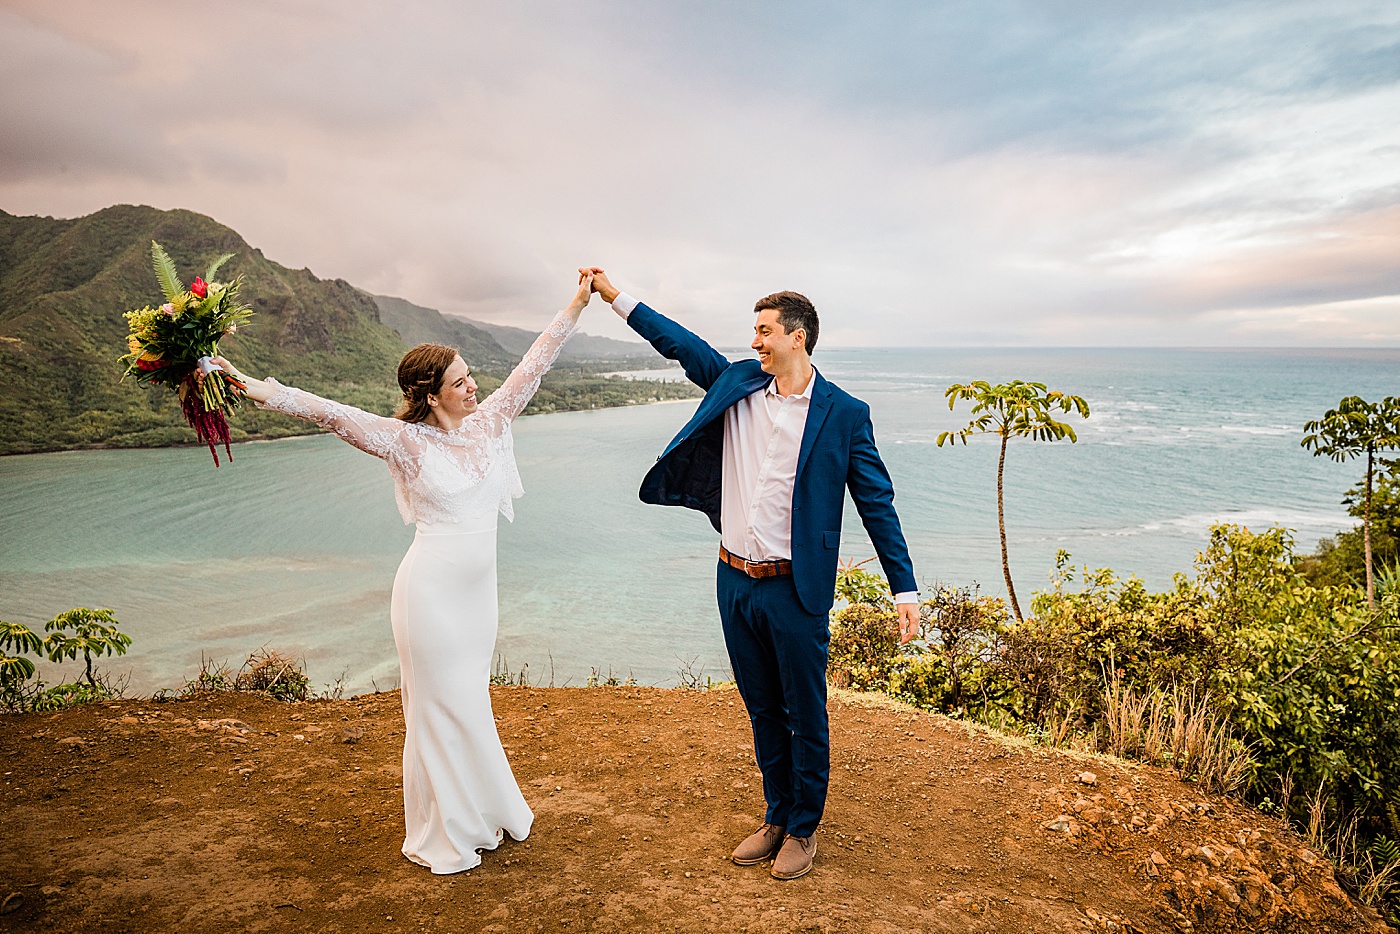 Adventurous Oahu elopement. The bride and groom holding hands celebrating on a cliff in front of the ocean.